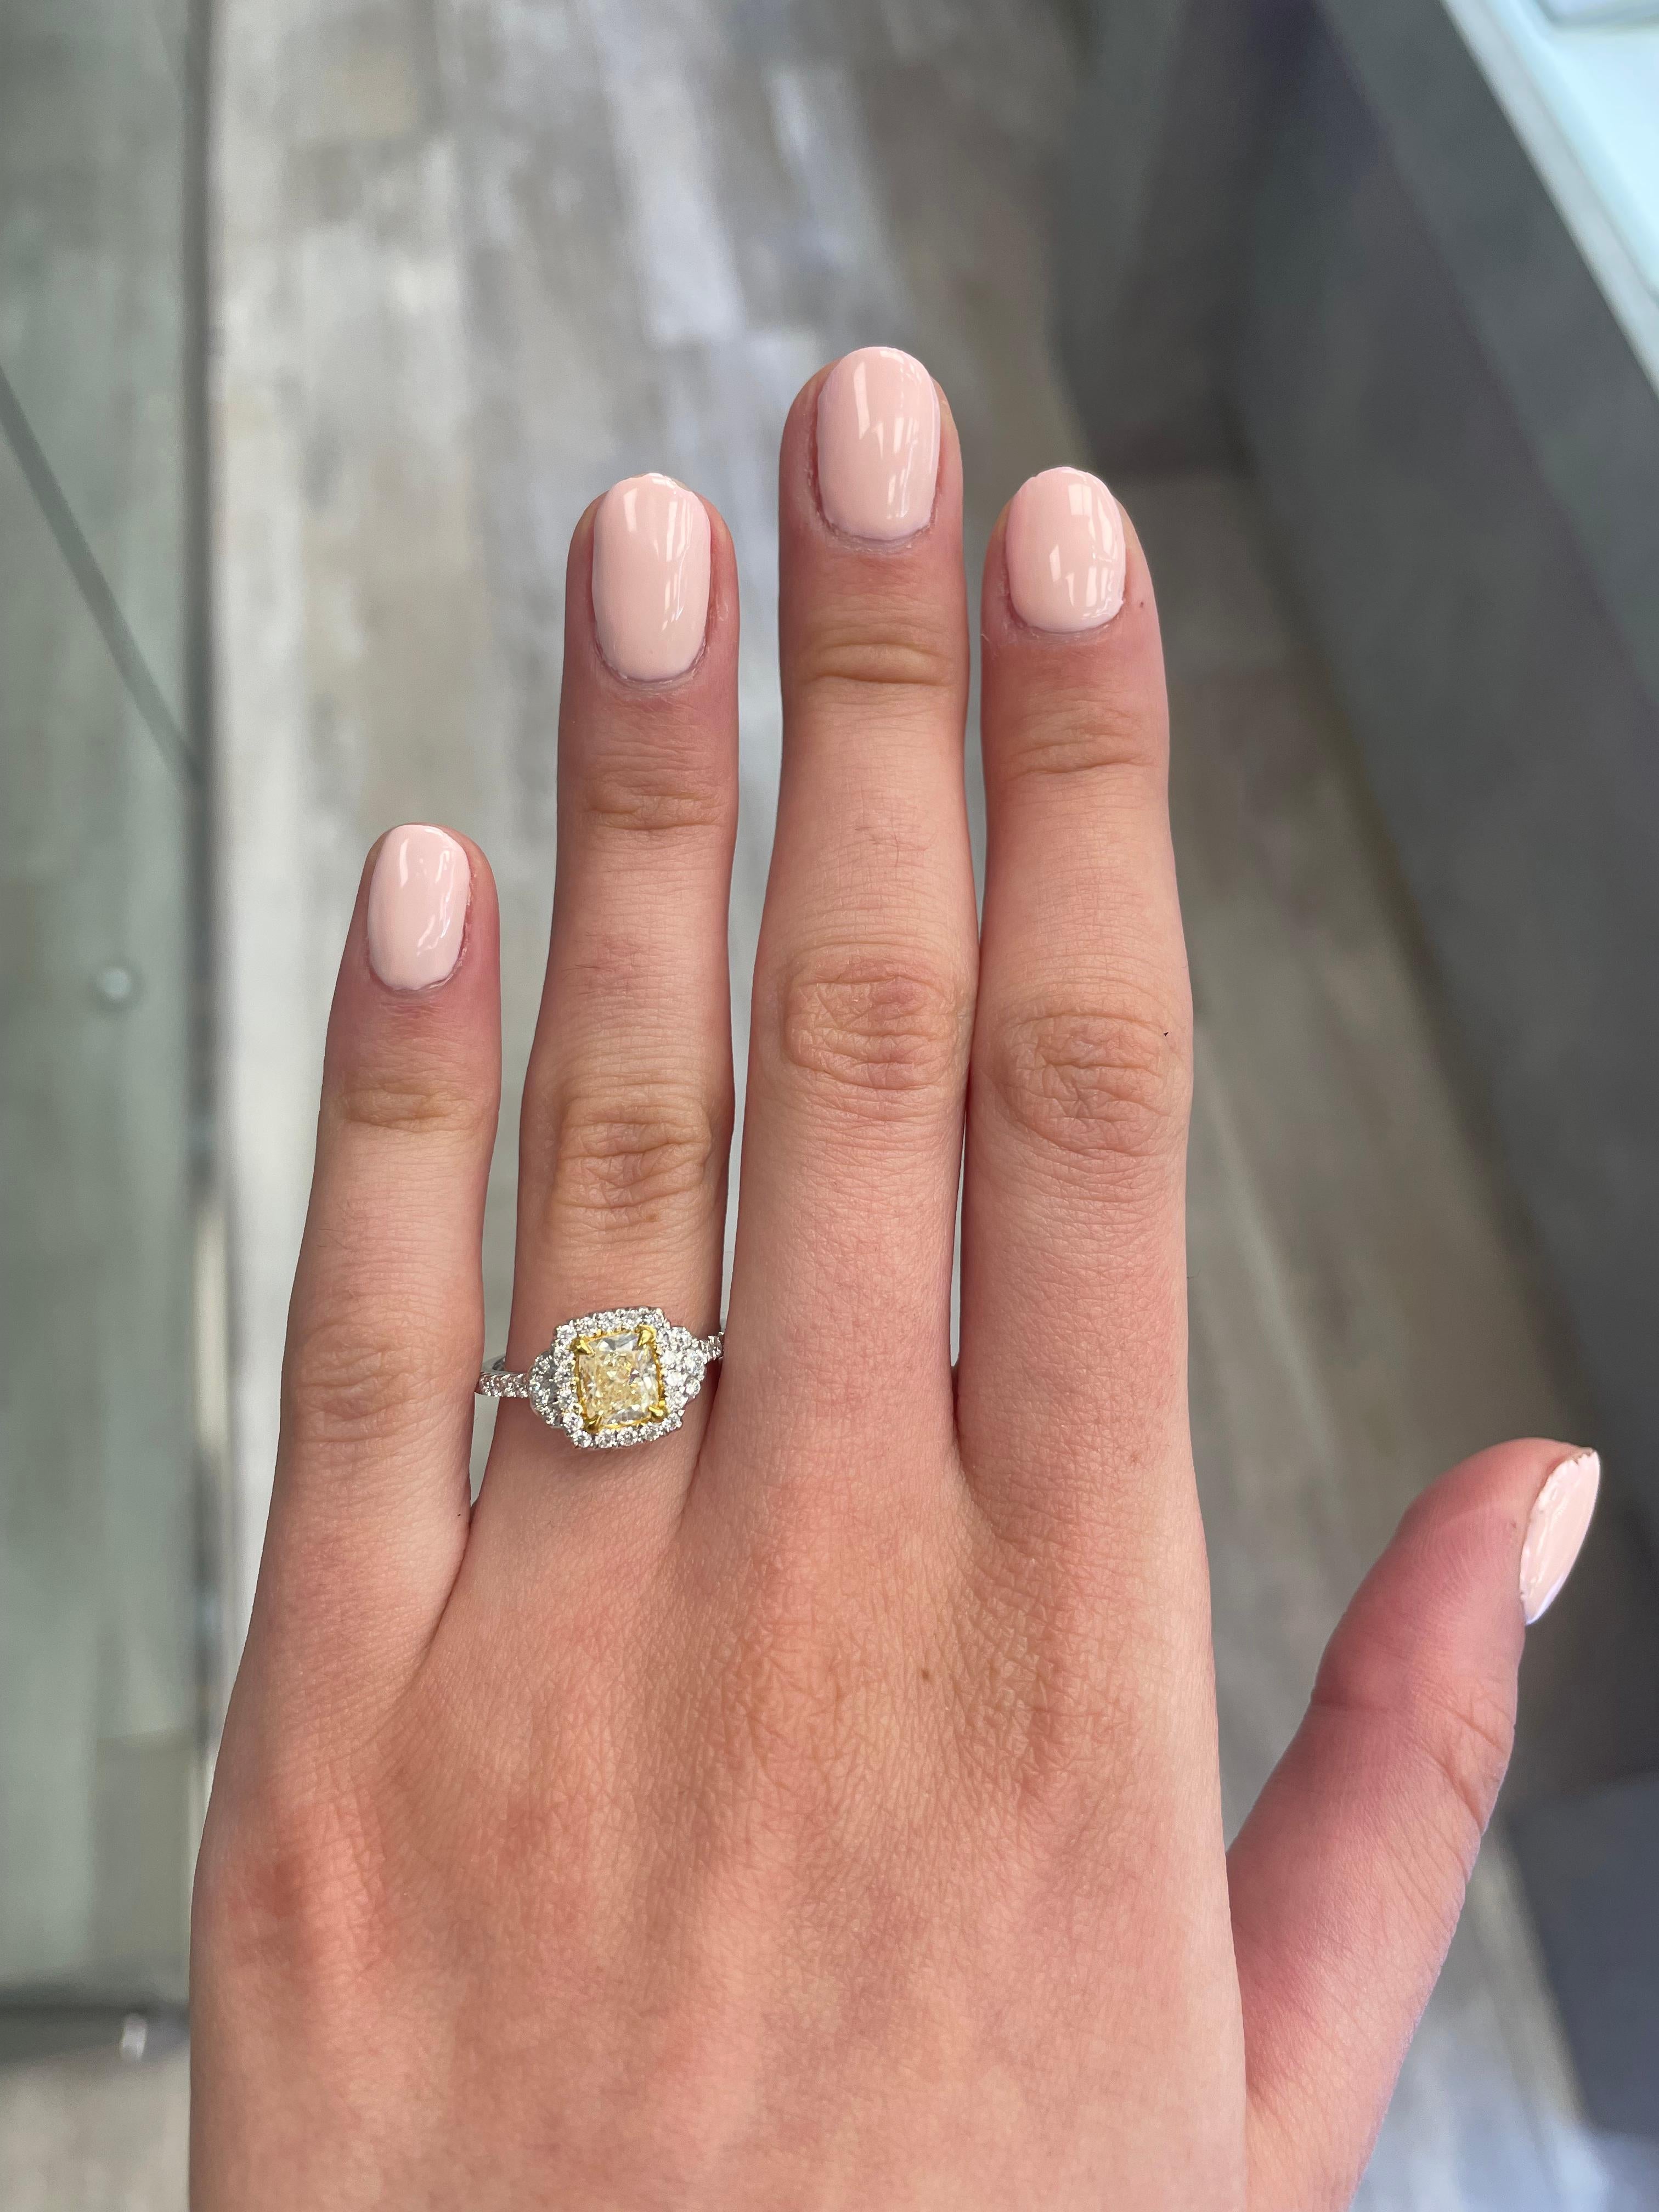 Stunning modern EGL certified yellow diamond with halo ring, two-tone 18k yellow and white gold. By Alexander Beverly Hills
1.38 carats total diamond weight.
0.96 carat cushion cut Fancy Yellow color and SI2 clarity diamond, EGL graded. Complimented